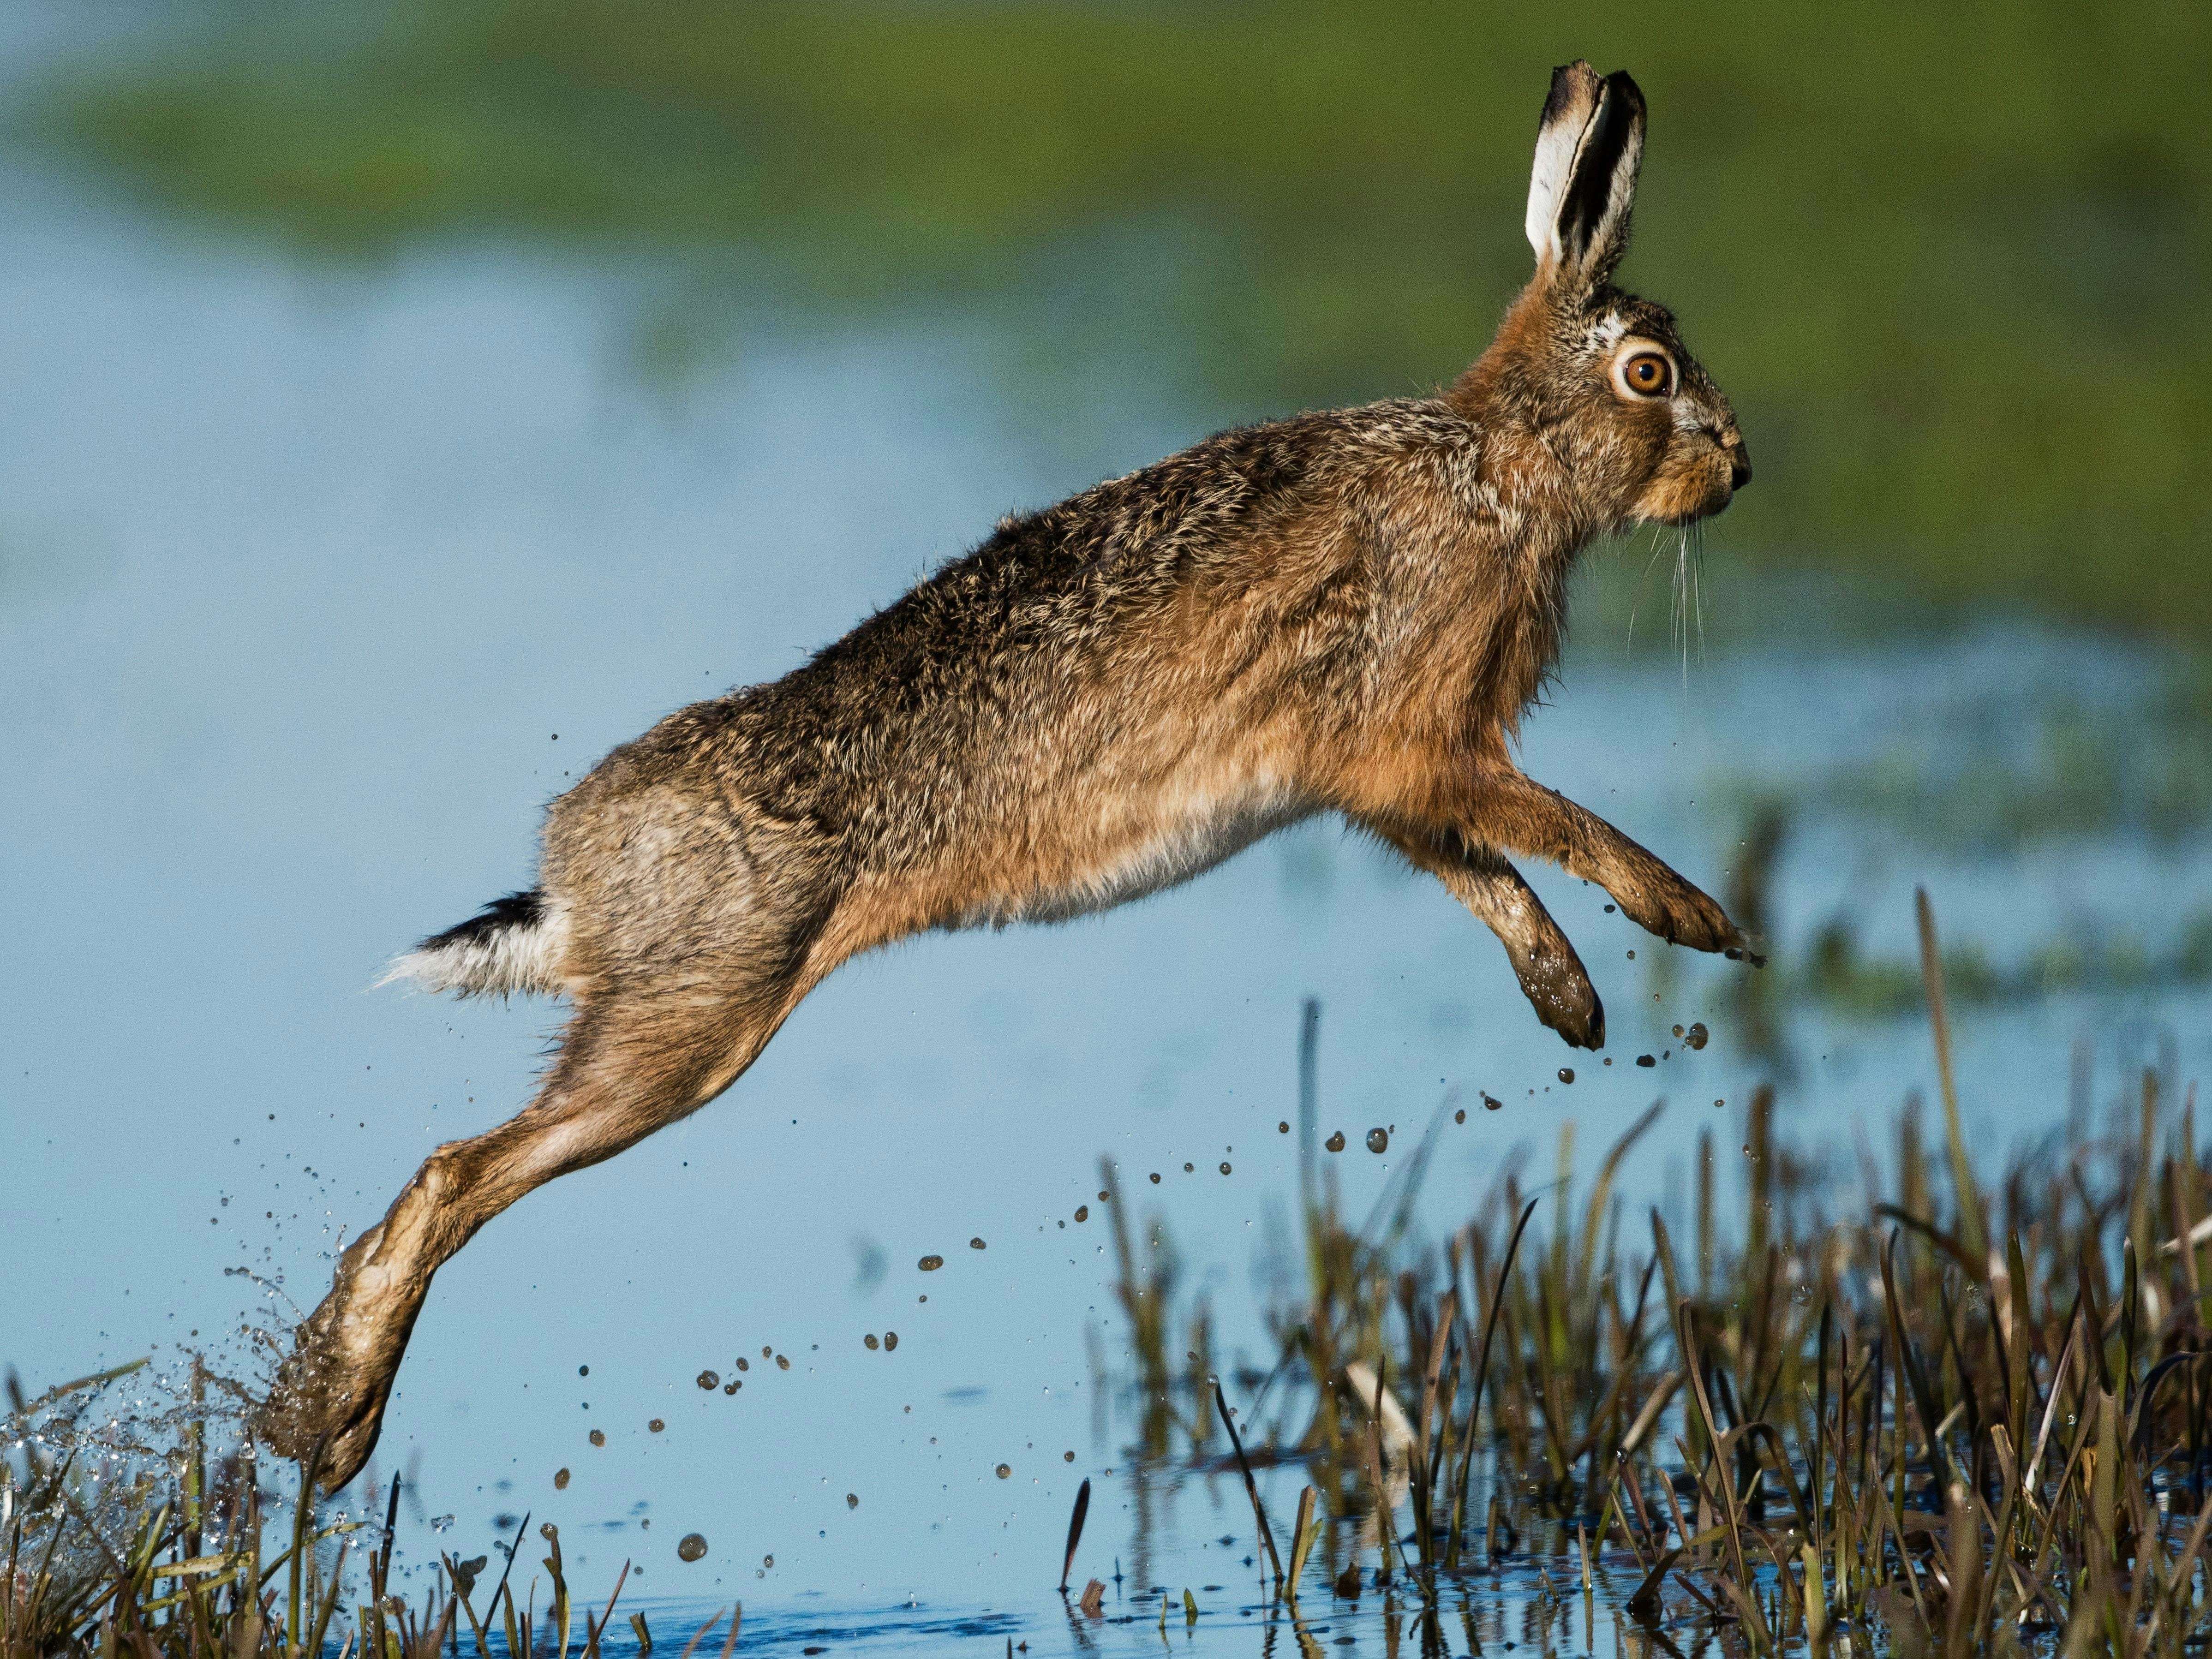 A brown hare captured jumping across water